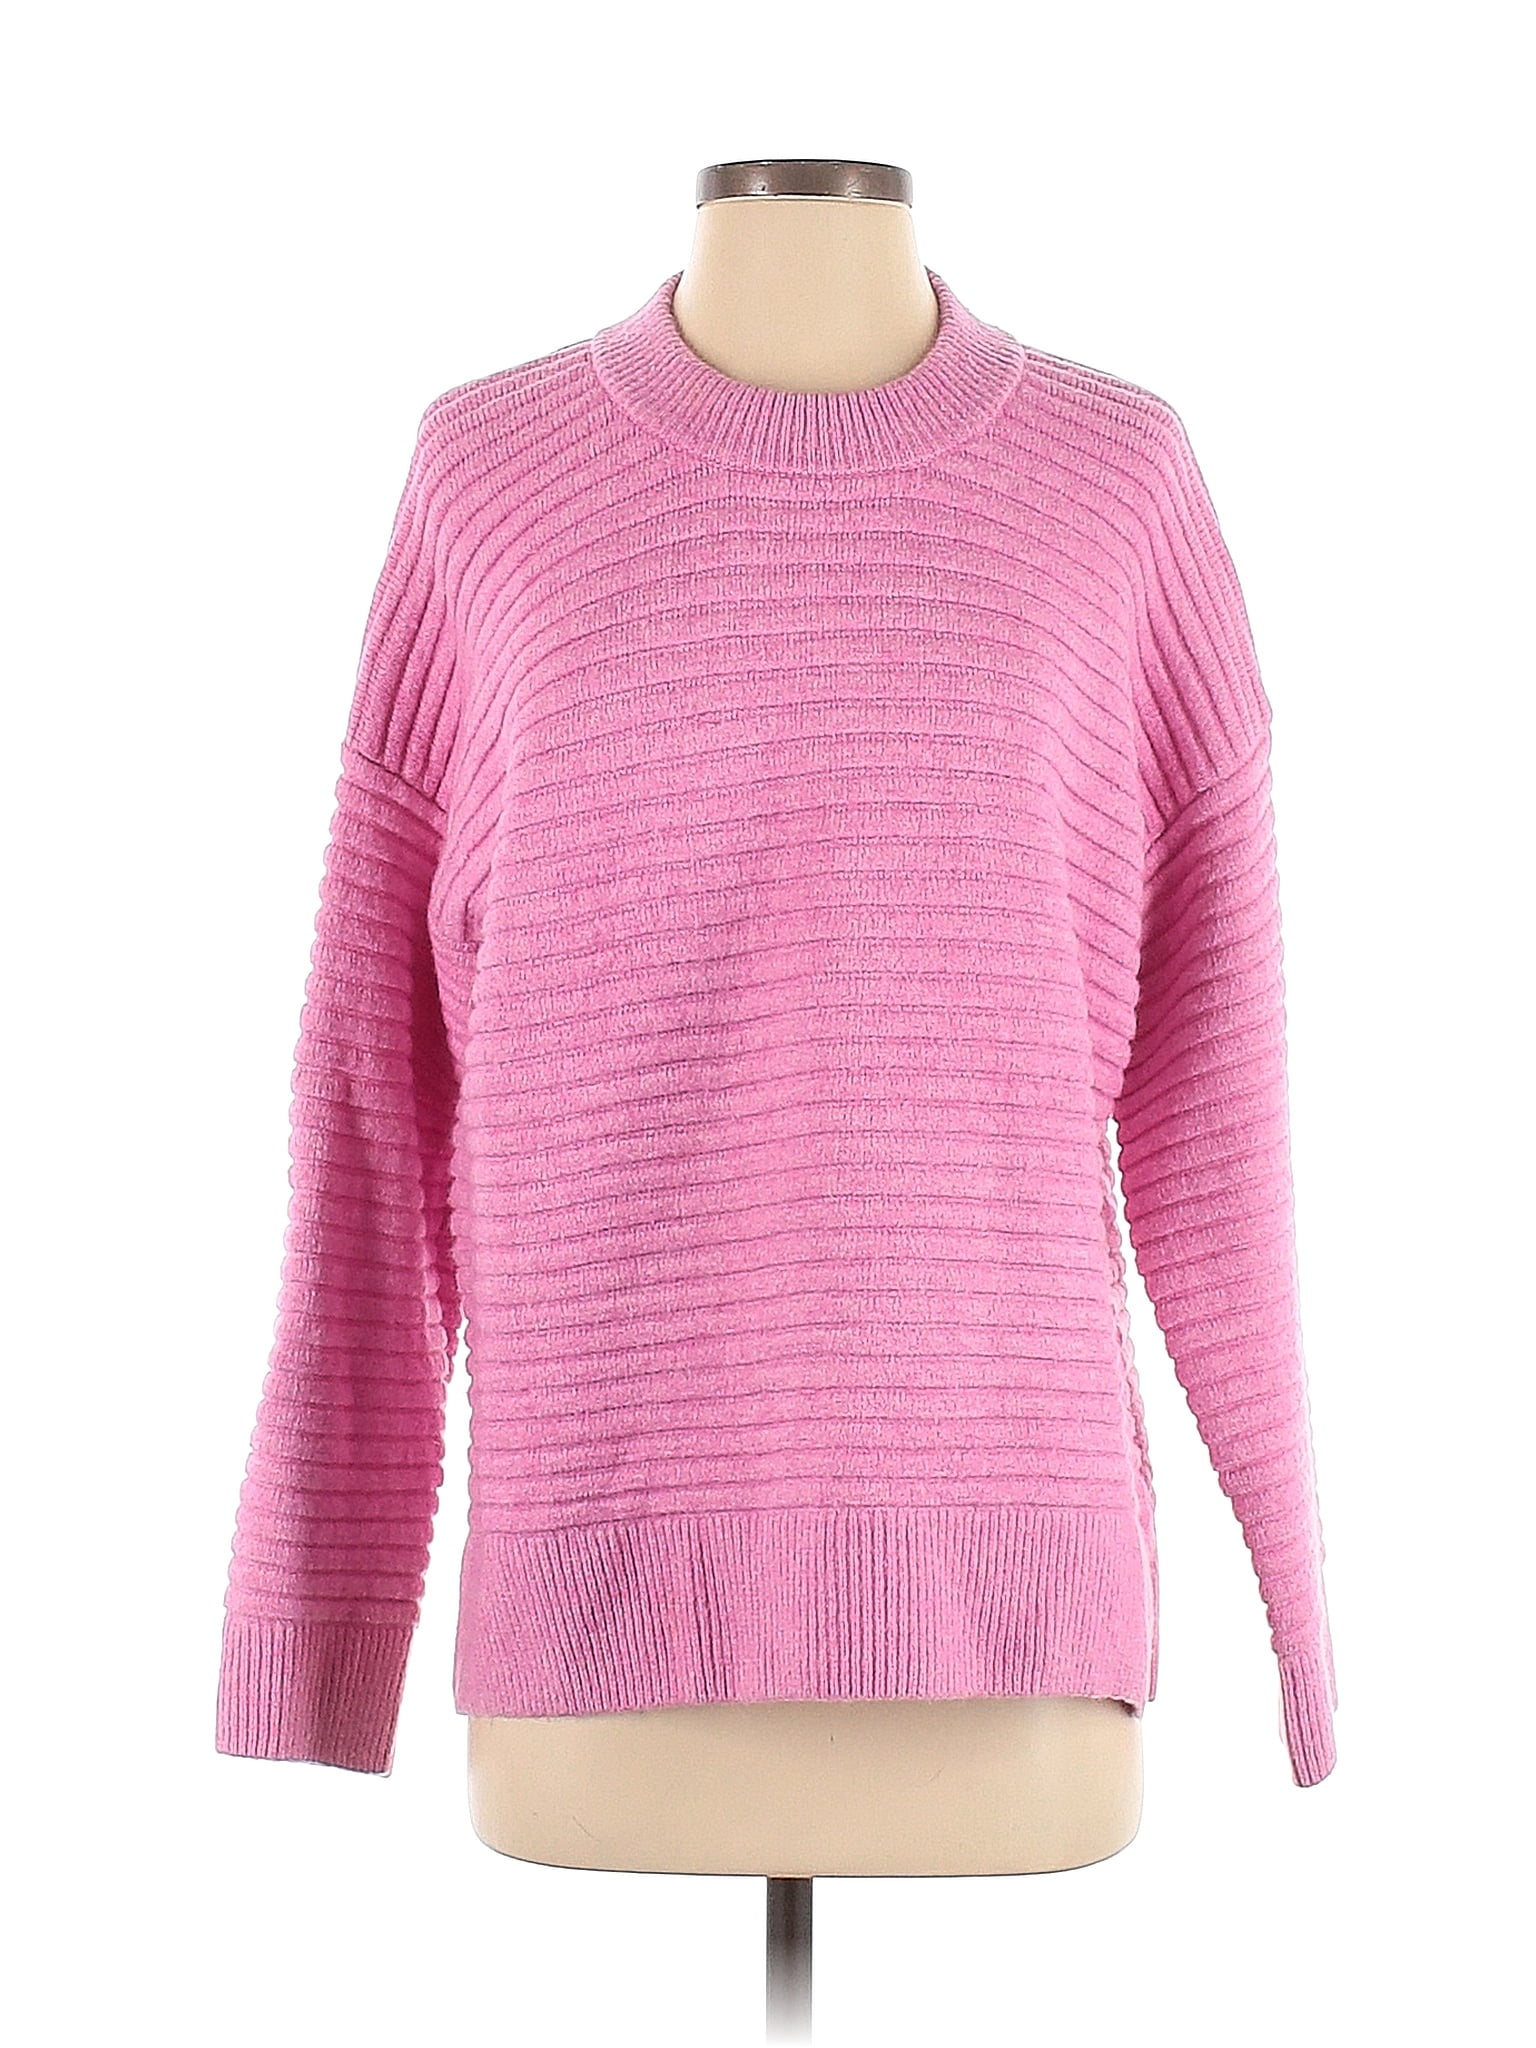 Madewell Color Block Pink Pullover Sweater Size S - 65% off | thredUP